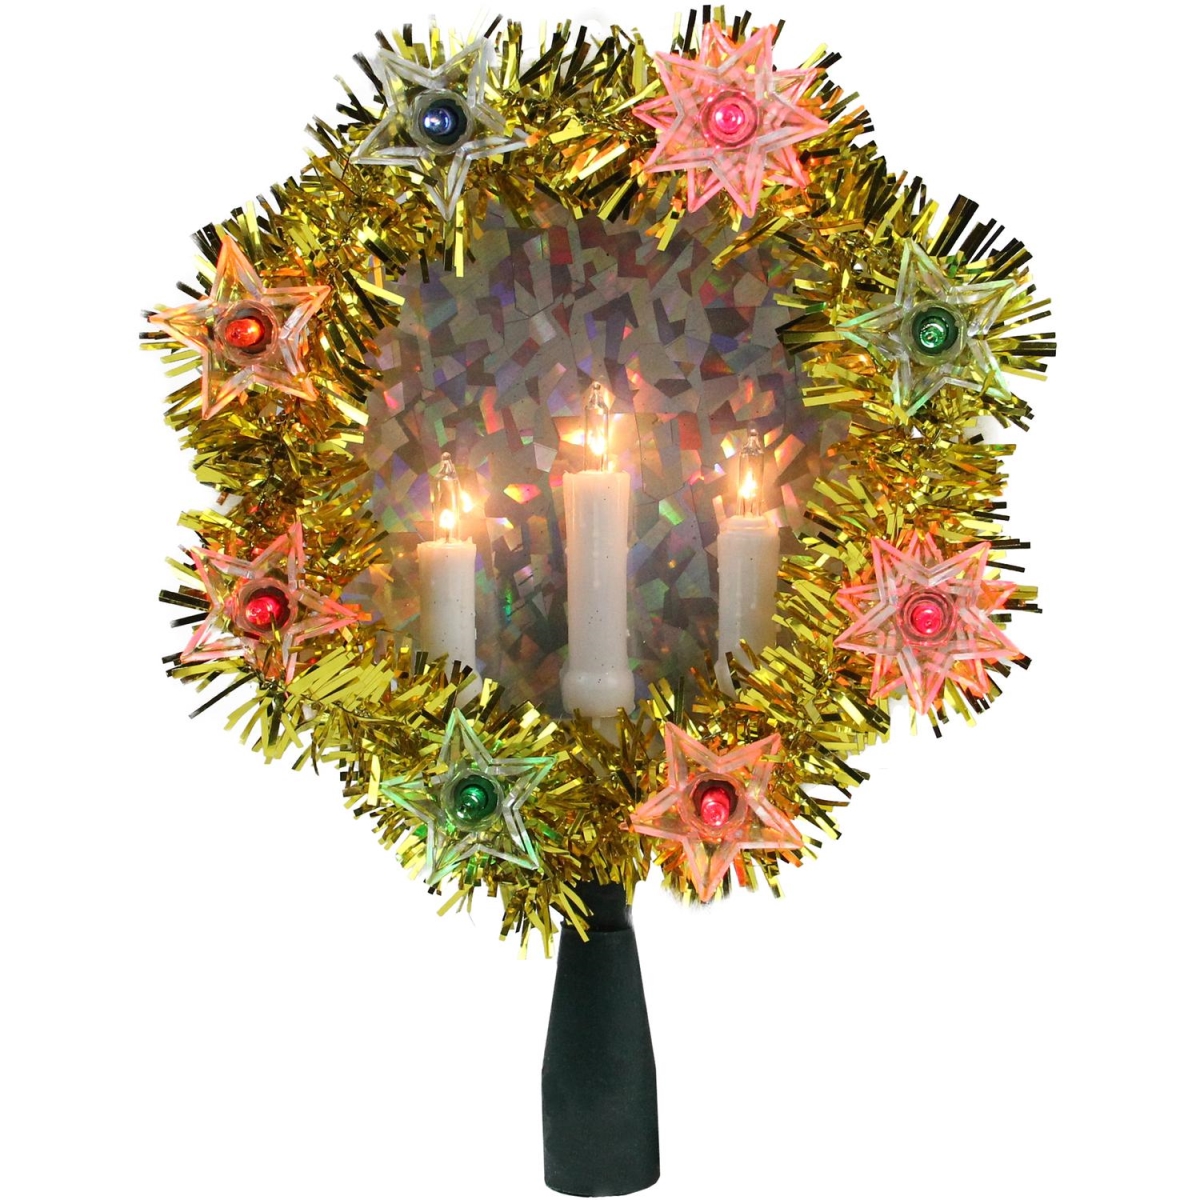 Picture of Northlight 32606346 7 in. Gold Tinsel Wreath with Candles Christmas Tree Topper - Multi Lights